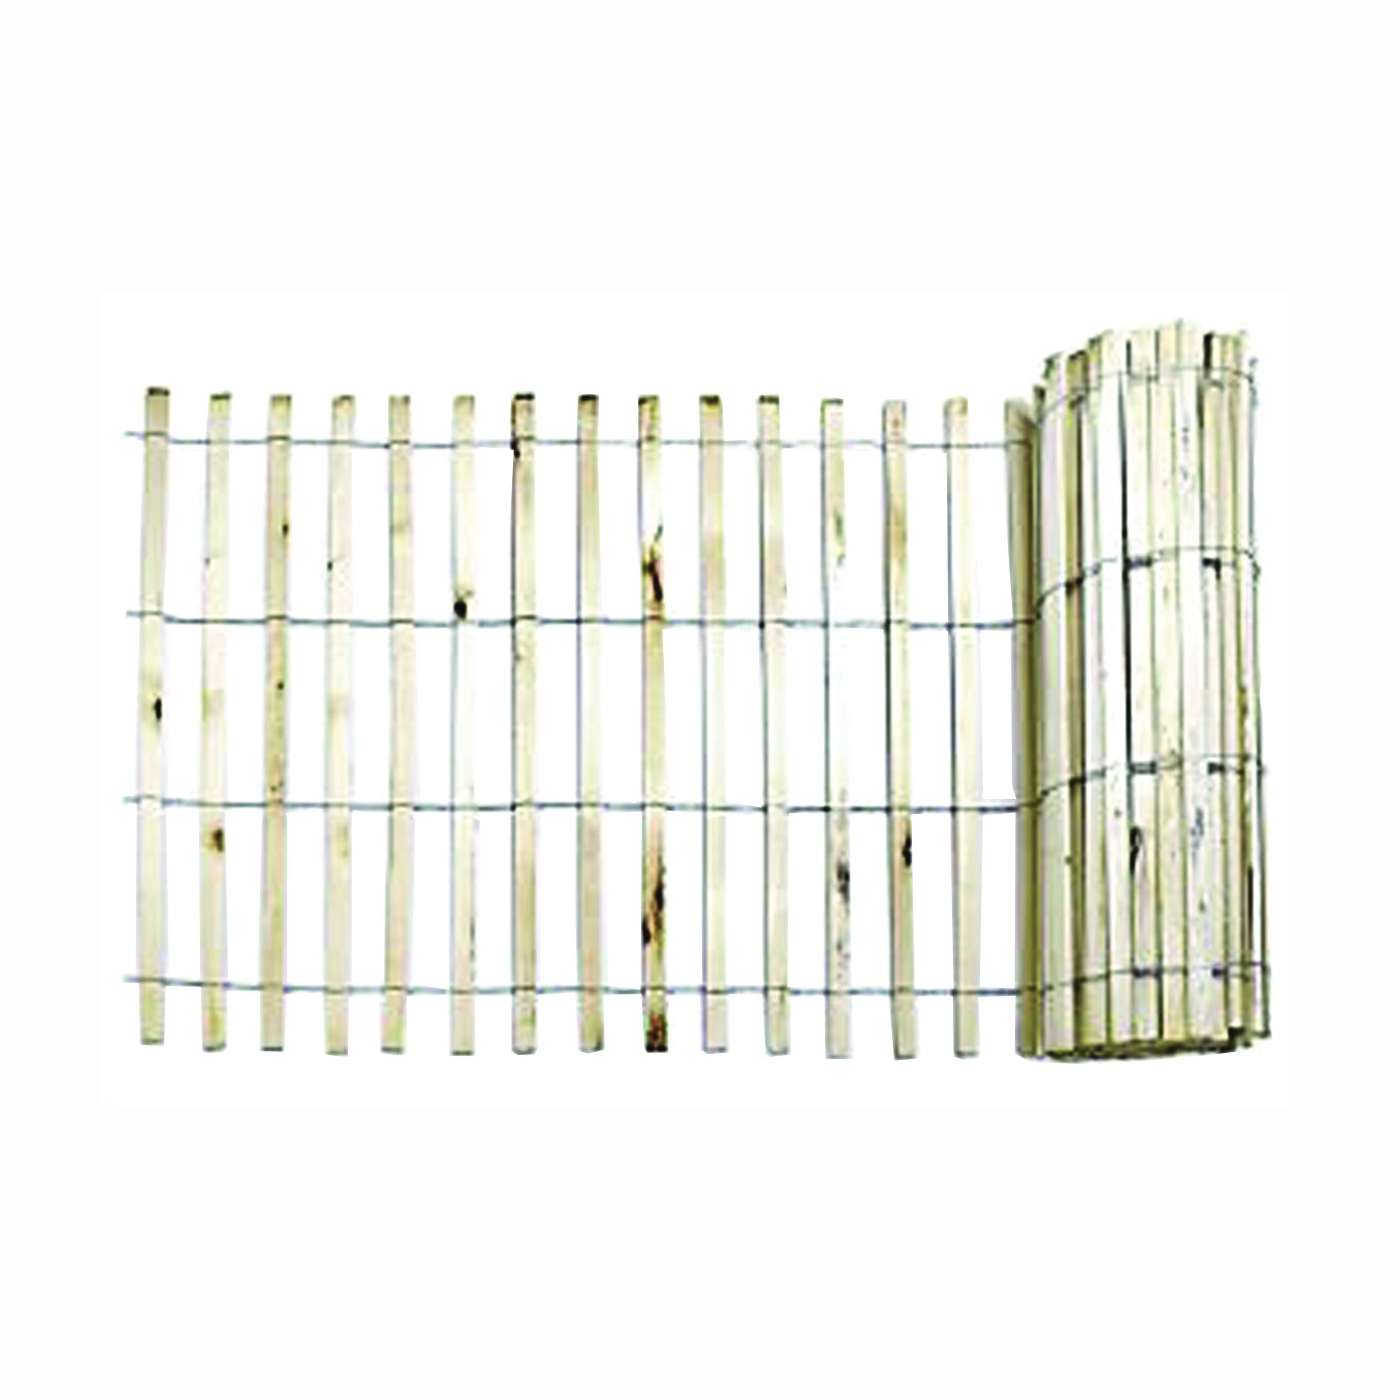 14910-9-48 Snow/Sand Fence, 50 ft L, 3/8 x 1-1/2 in Mesh, Wood, Natural